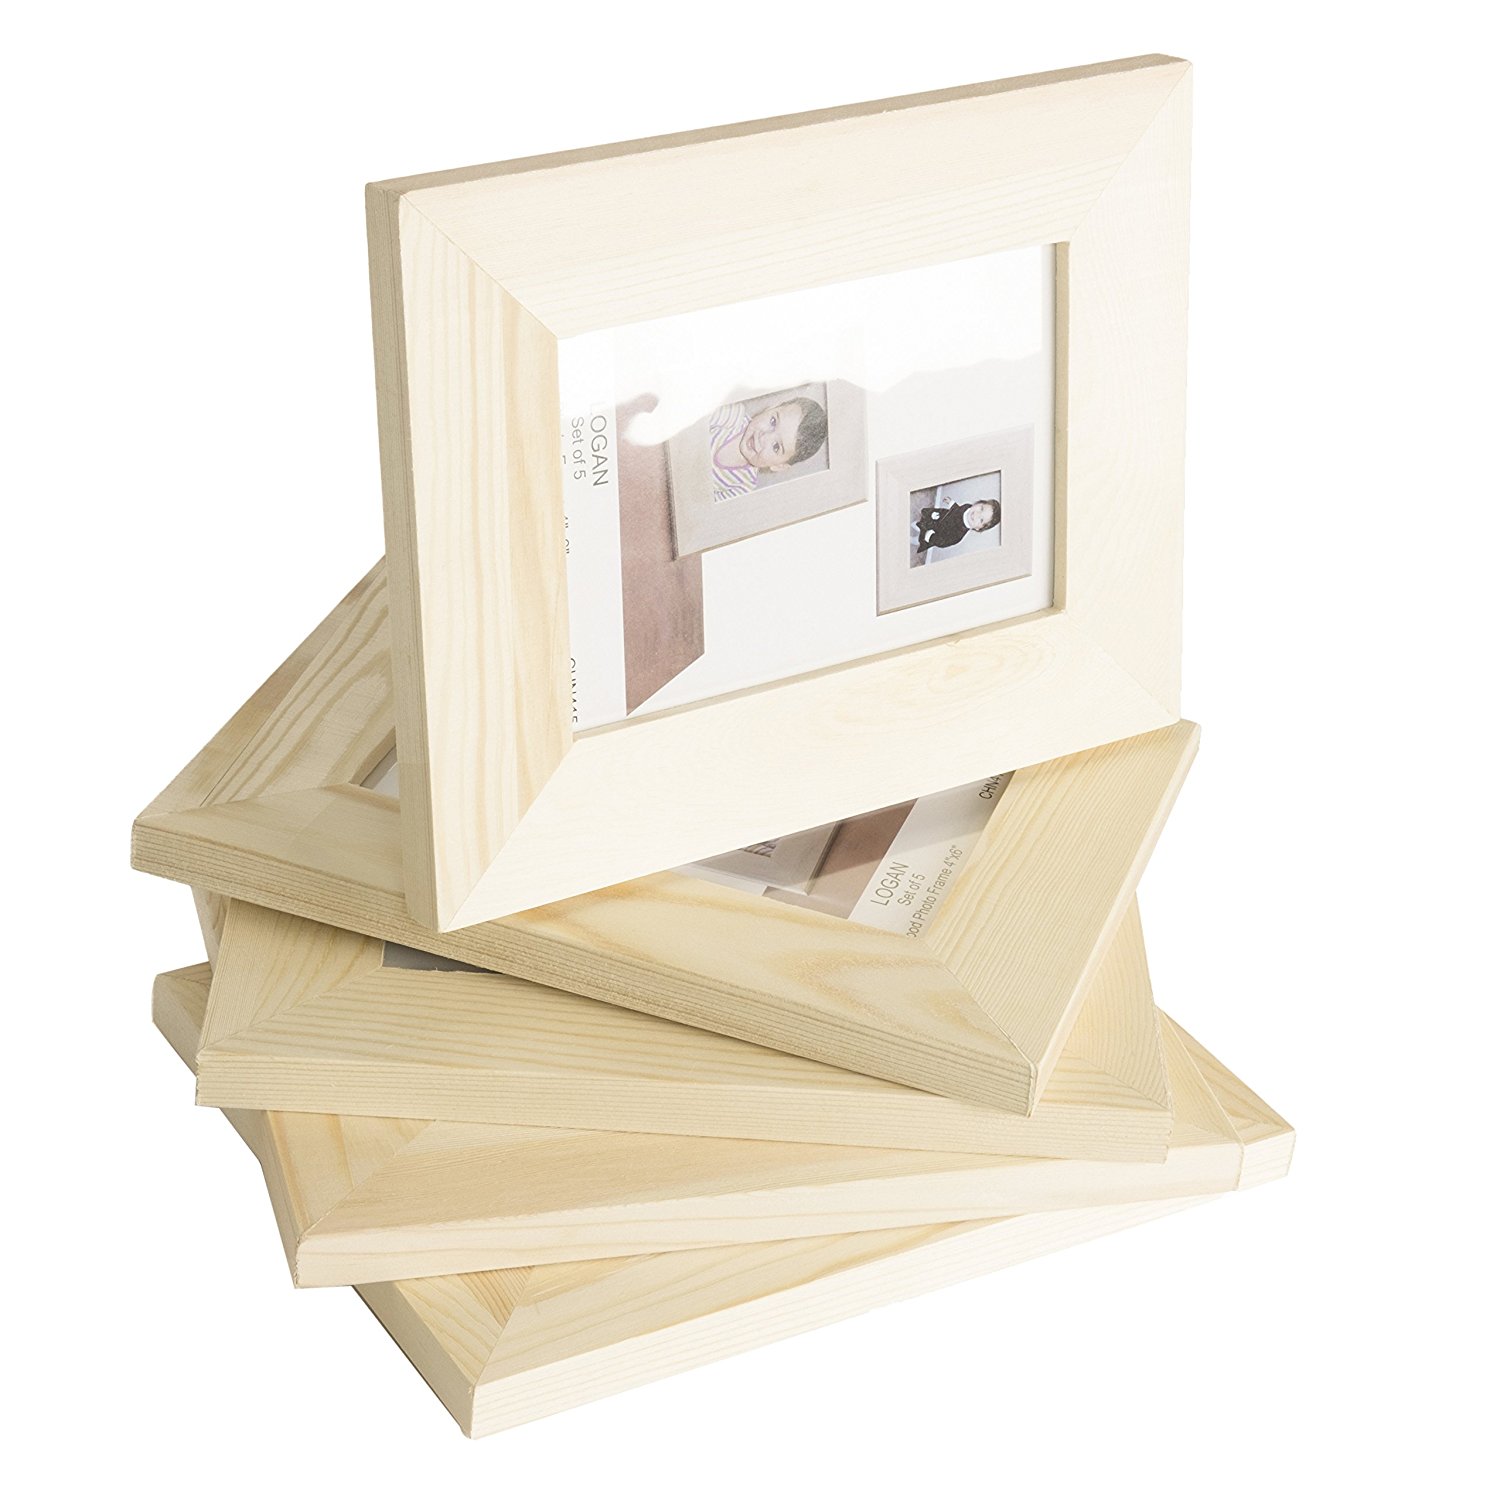 Solid DIY Unfinished Wood Picture Frame 4x6 Inches , Great for Kid’s Art Craft Projects Set of 5